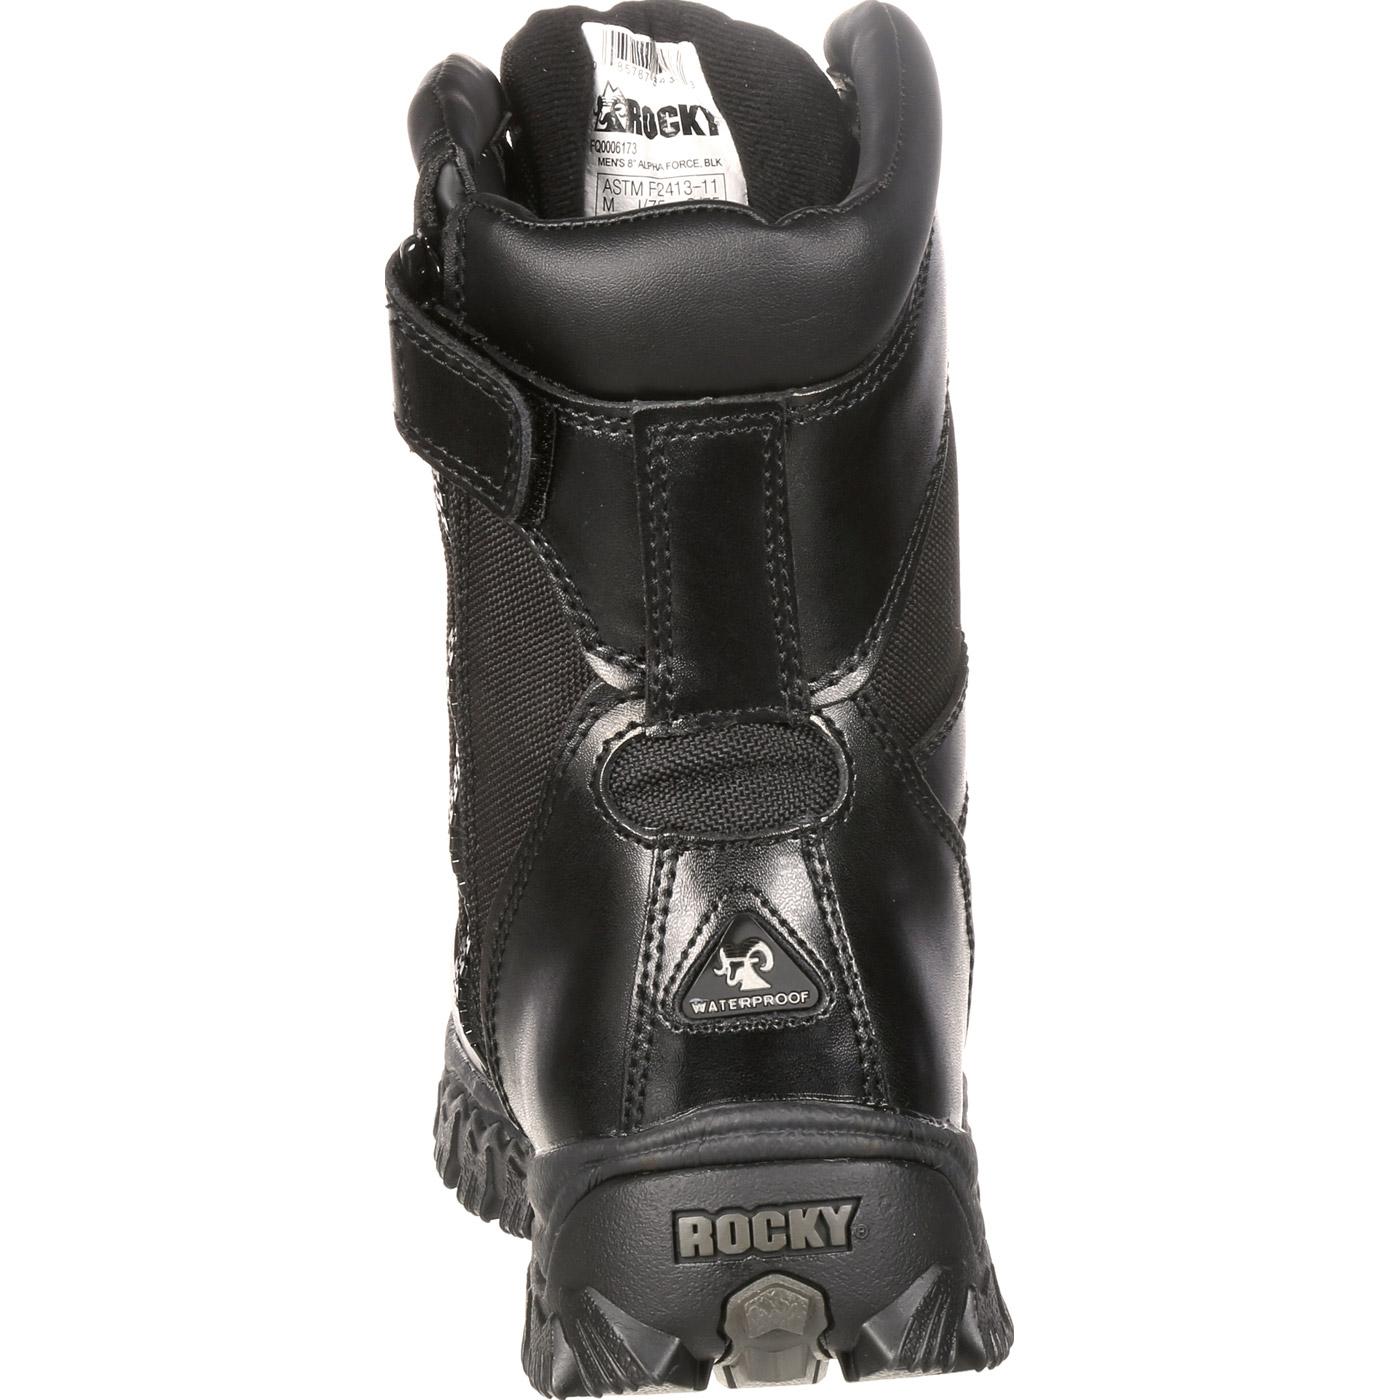 Rocky Alpha Force Waterproof 400G Insulated Public Service Boot Size 5.5(W) - image 4 of 7